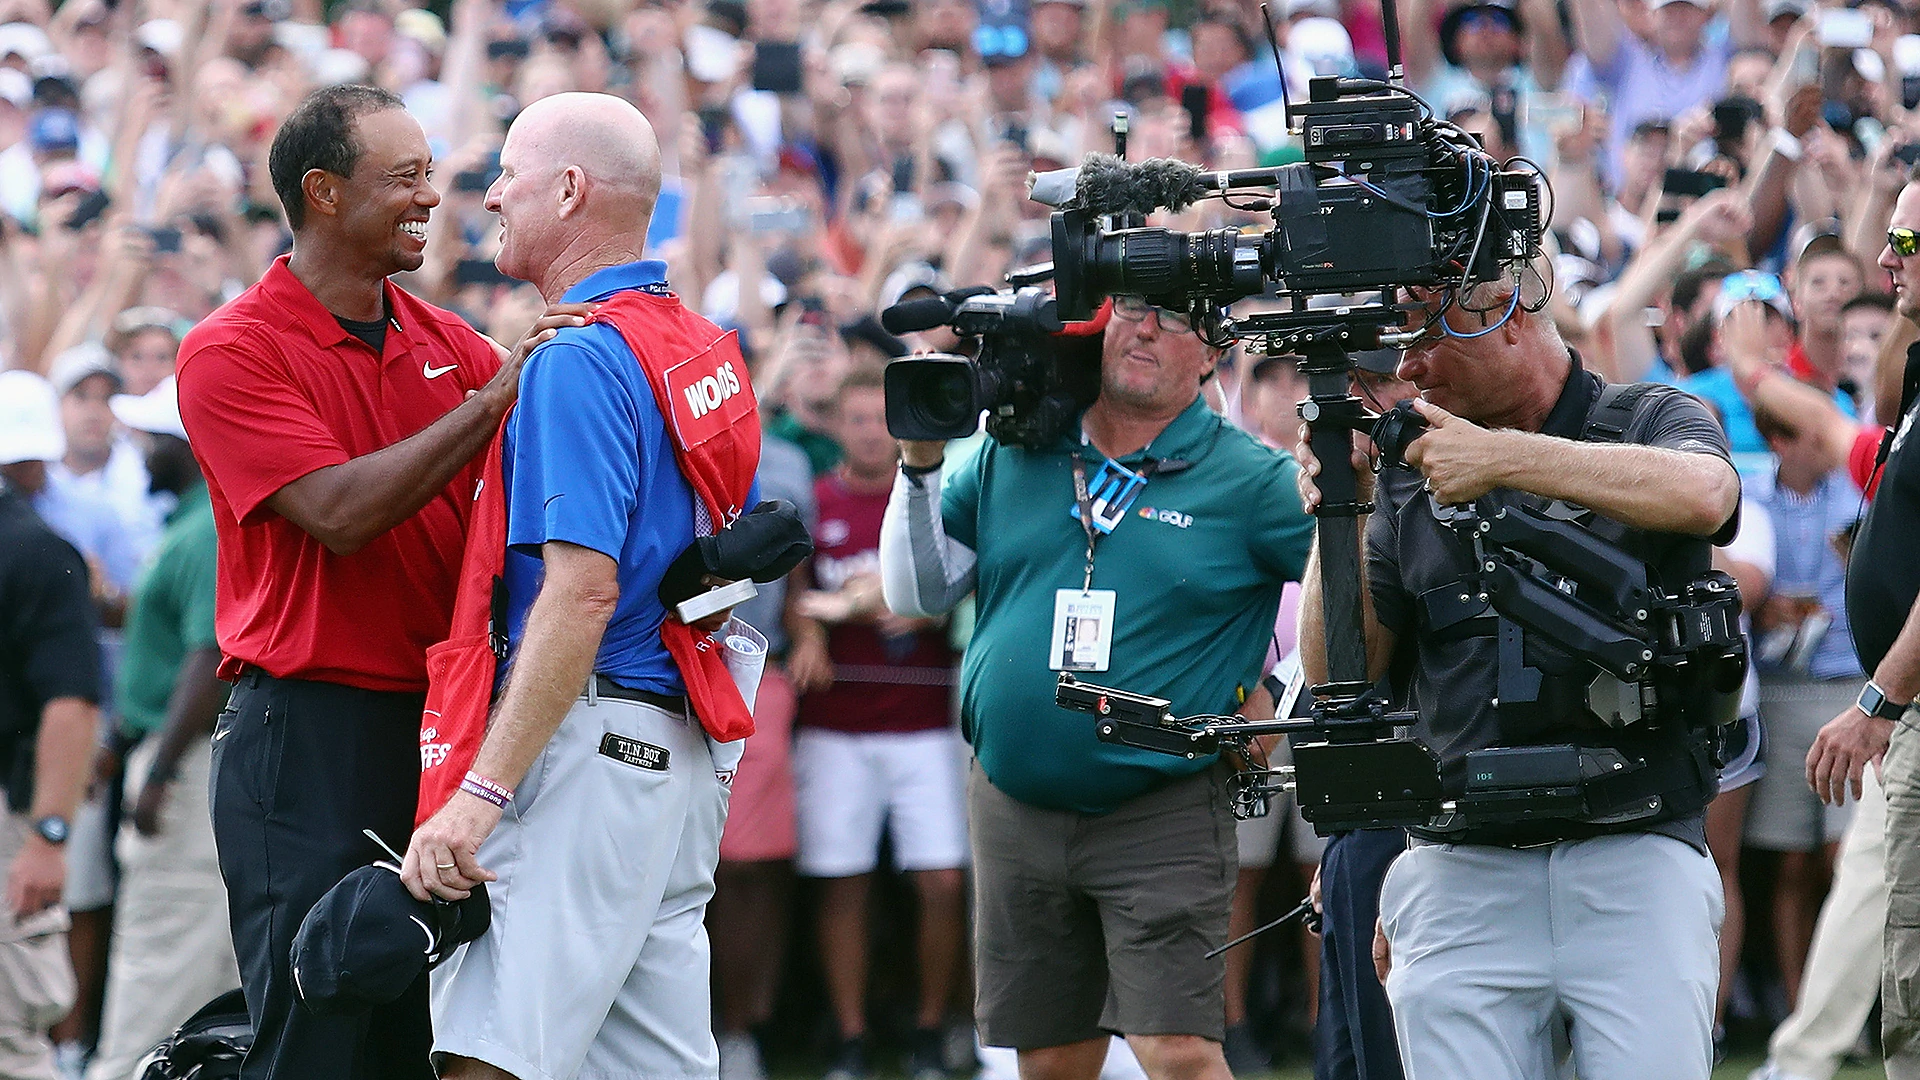 Woods' final round is highest-rated FEC telecast ever